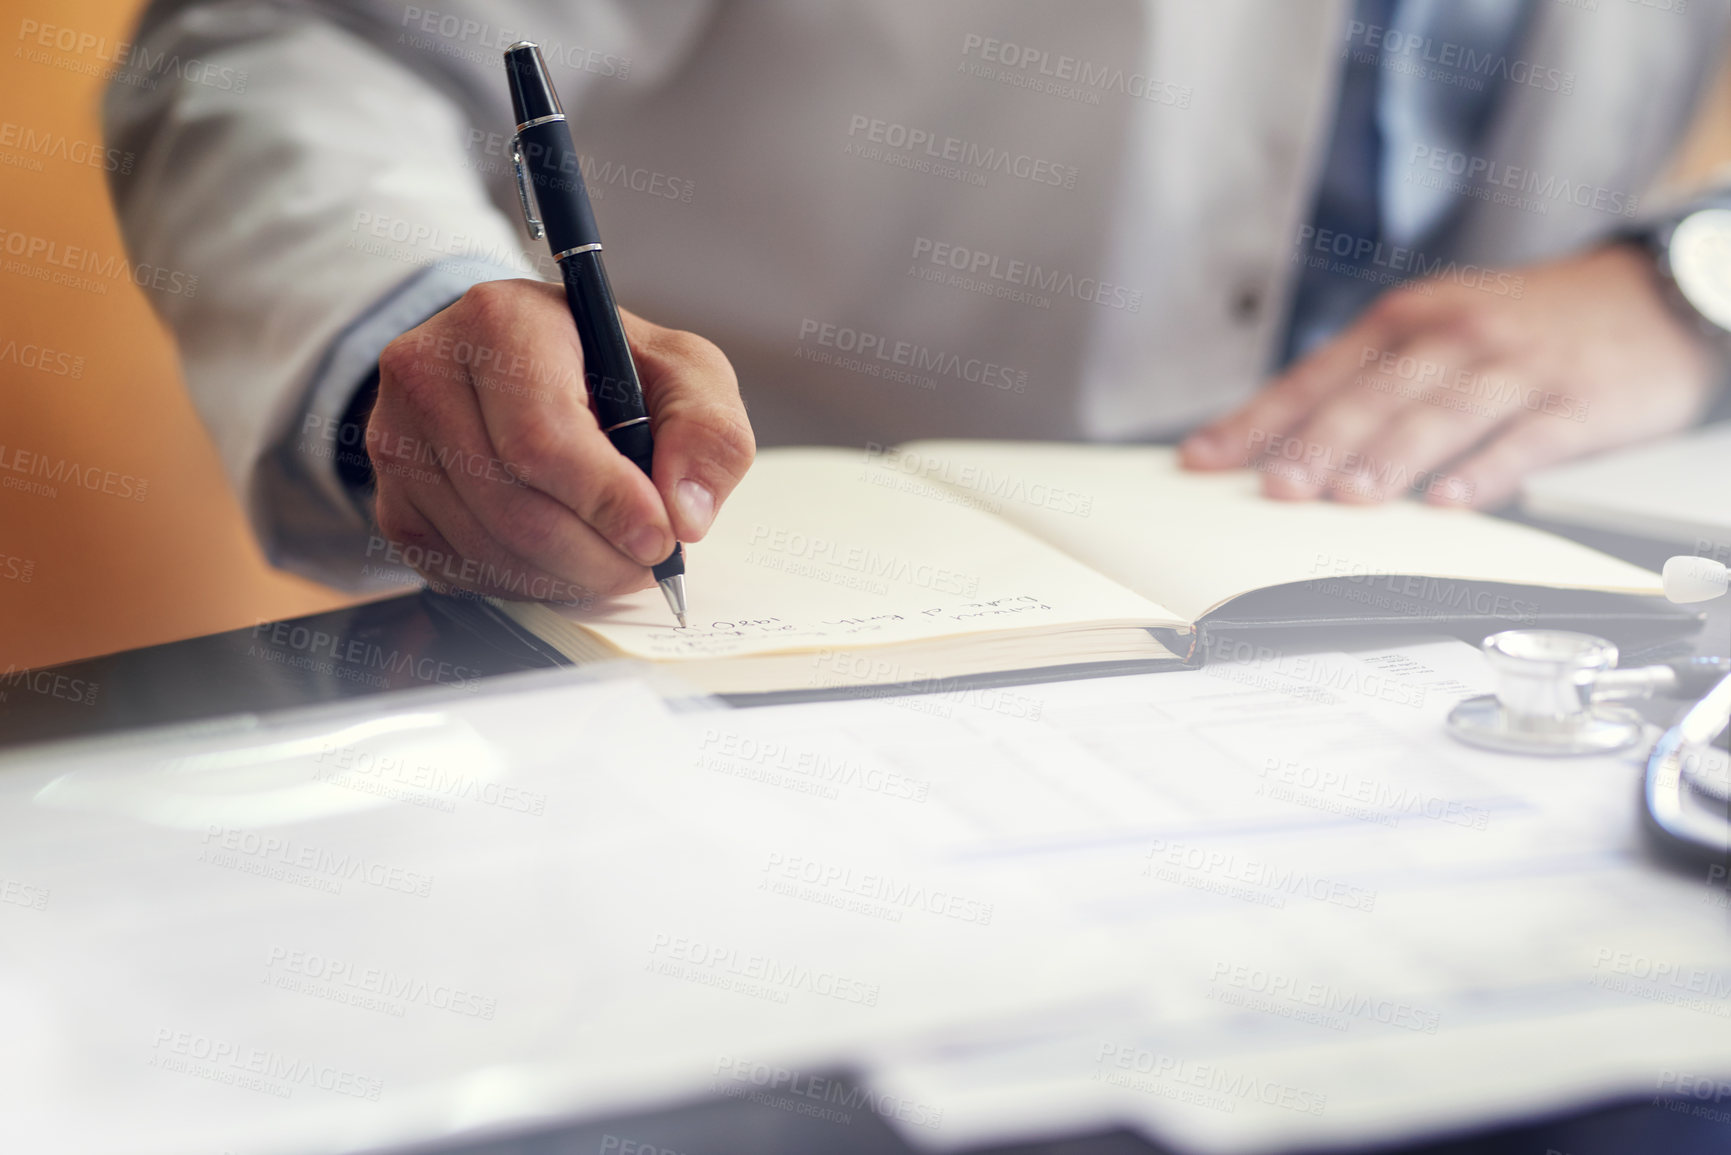 Buy stock photo Cropped shot of an unrecognizable male doctor writing in his diary while sitting in his office